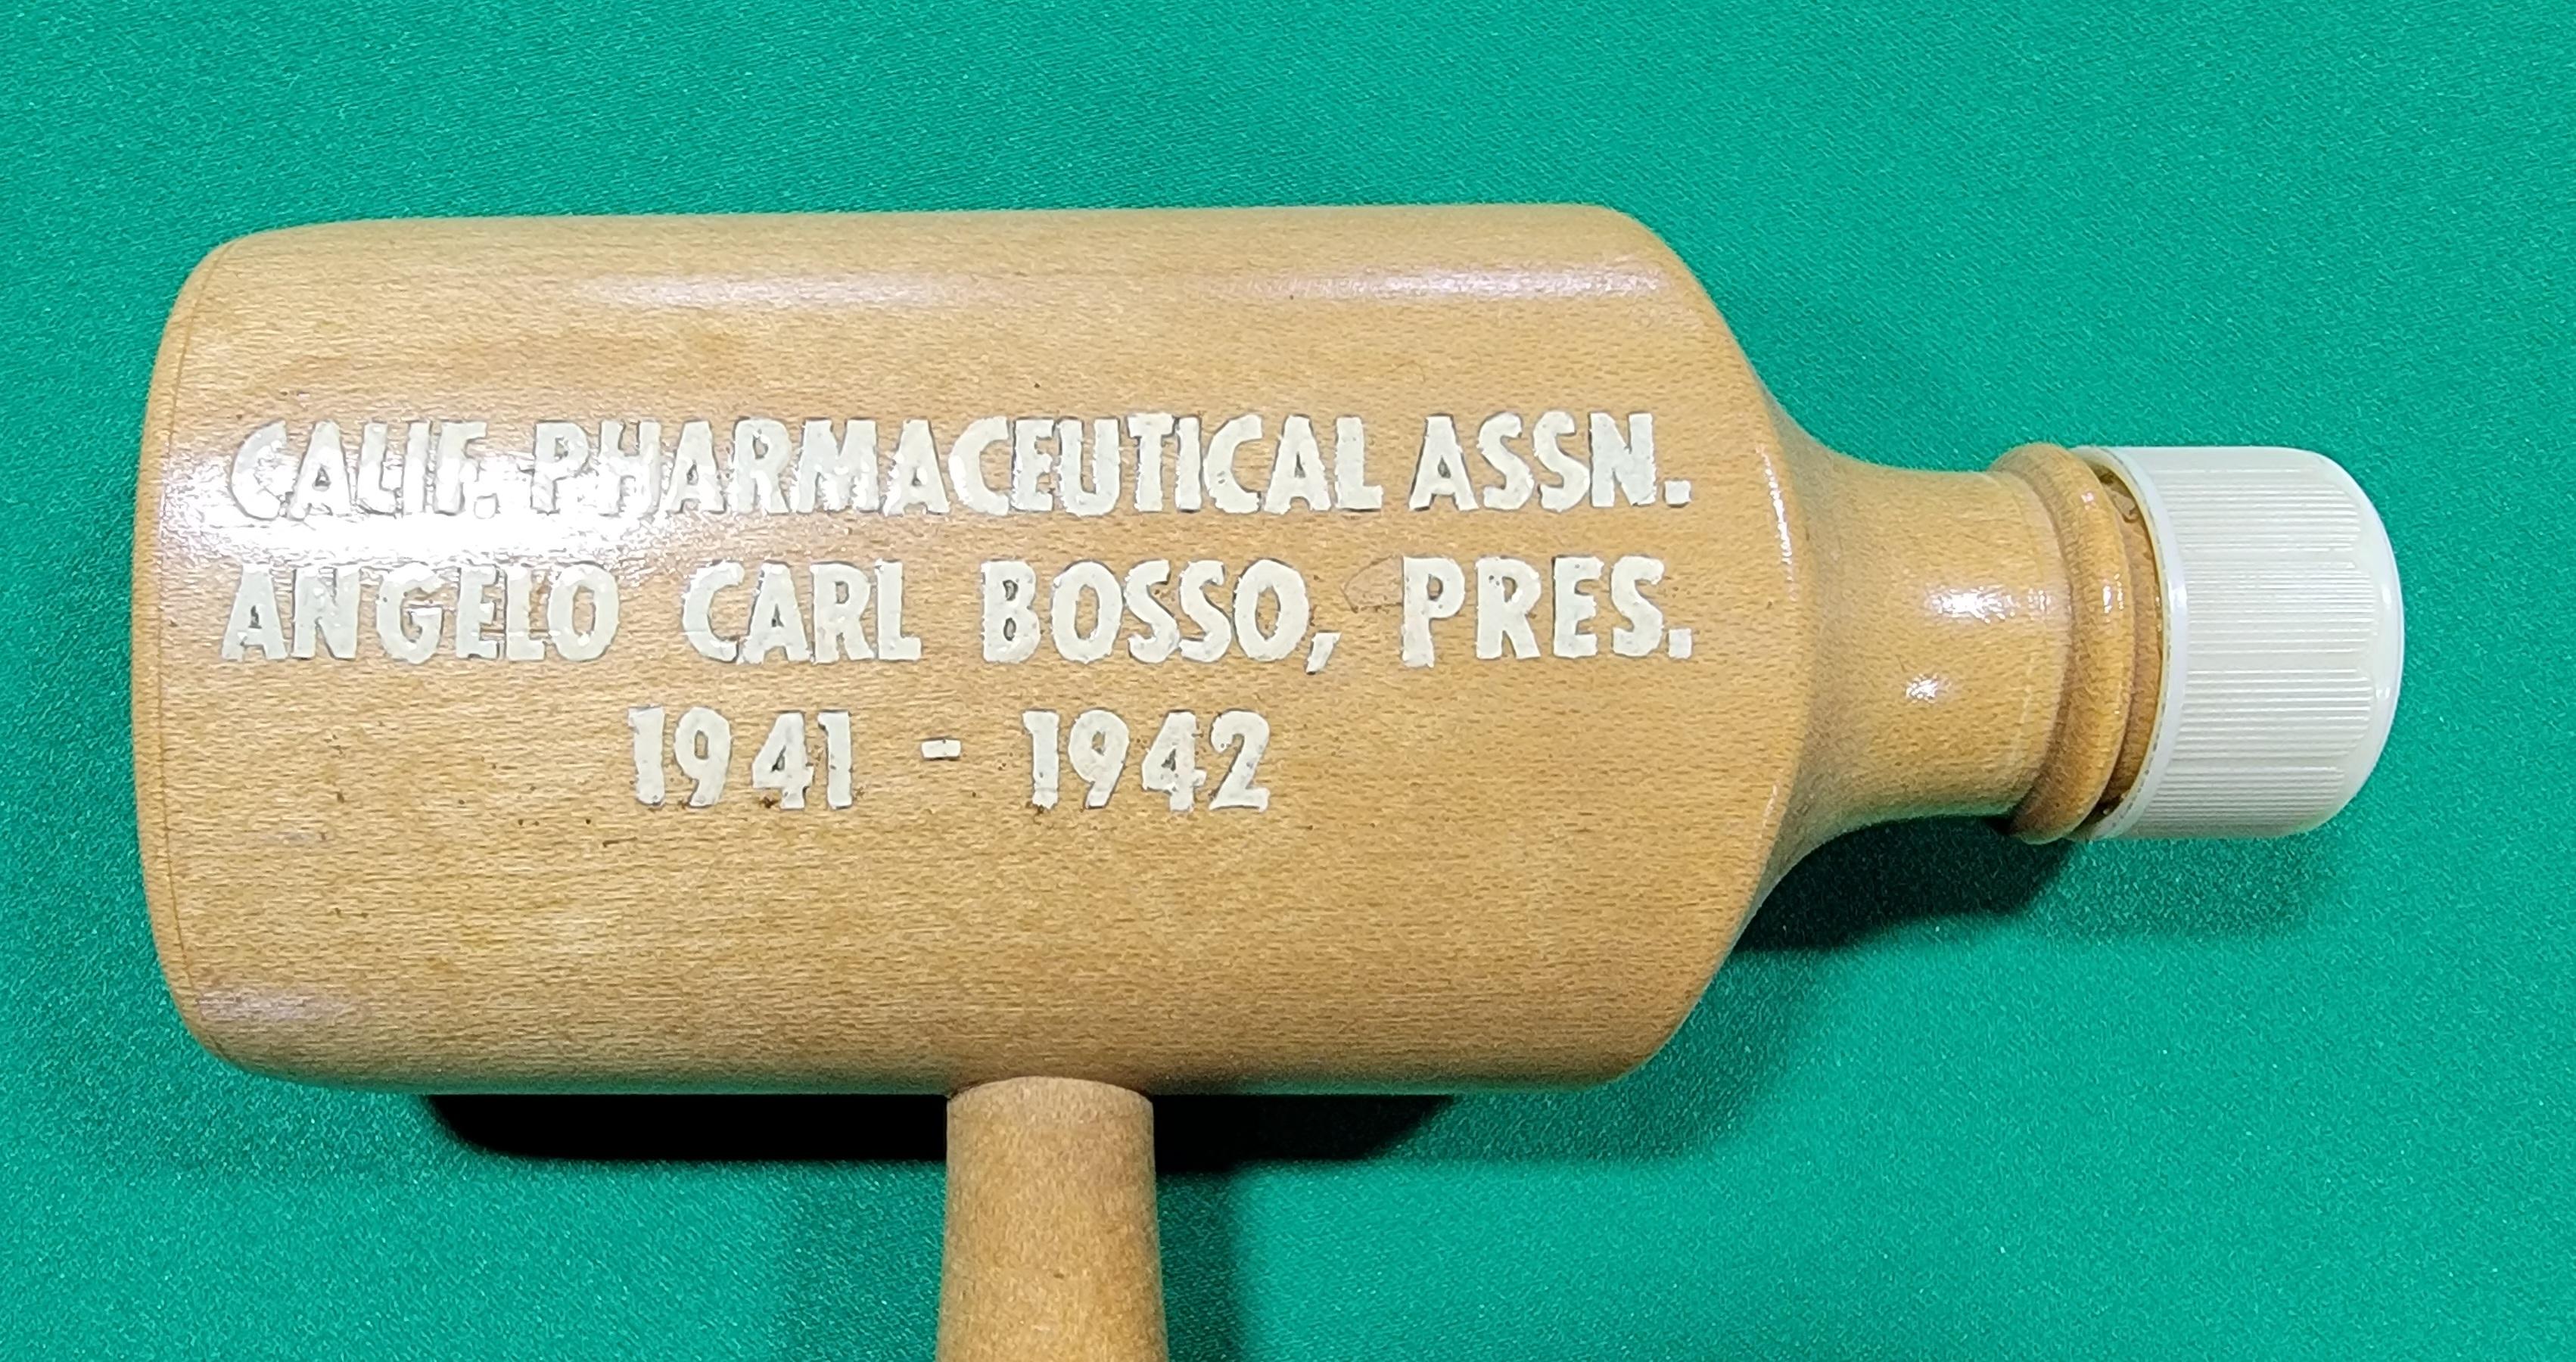 Unusual ceremonial / presentation gavel presented to Angelo Carlo Bosso, president of the California Pharmaceutical Association 1941-1942. Turned wood in the form of medicine bottles with a Bakelite bottle cap. His pharmacy was located in San